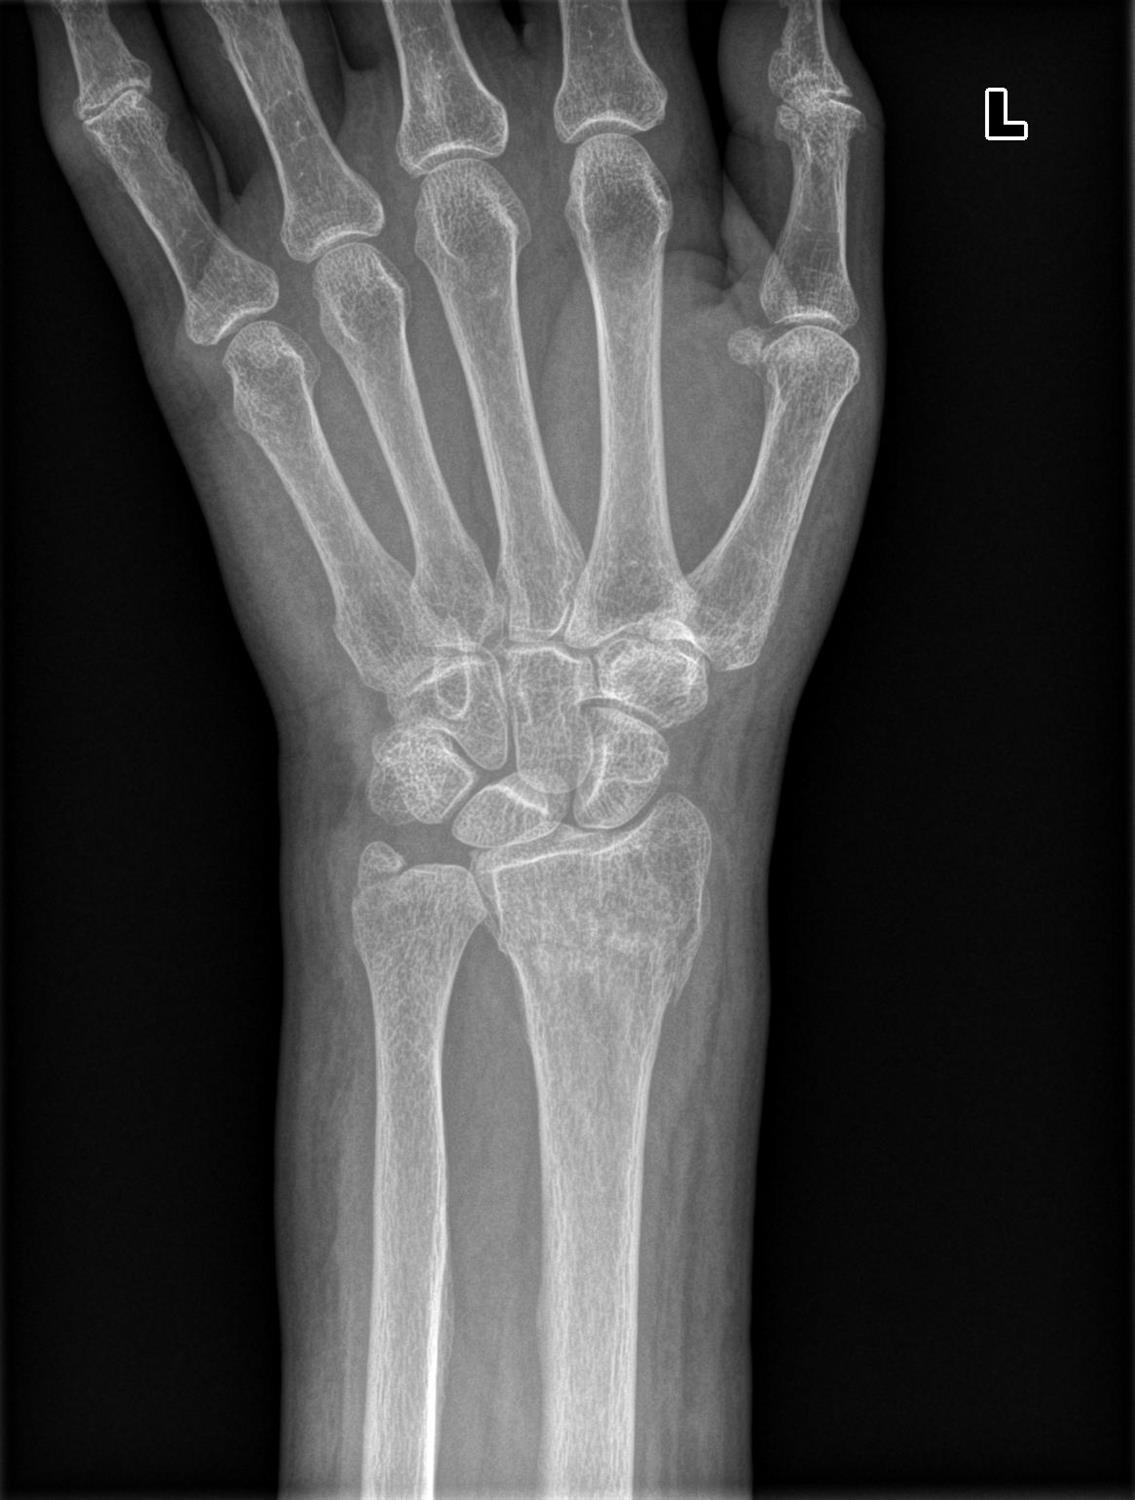 icd 10 code for right distal radius fracture